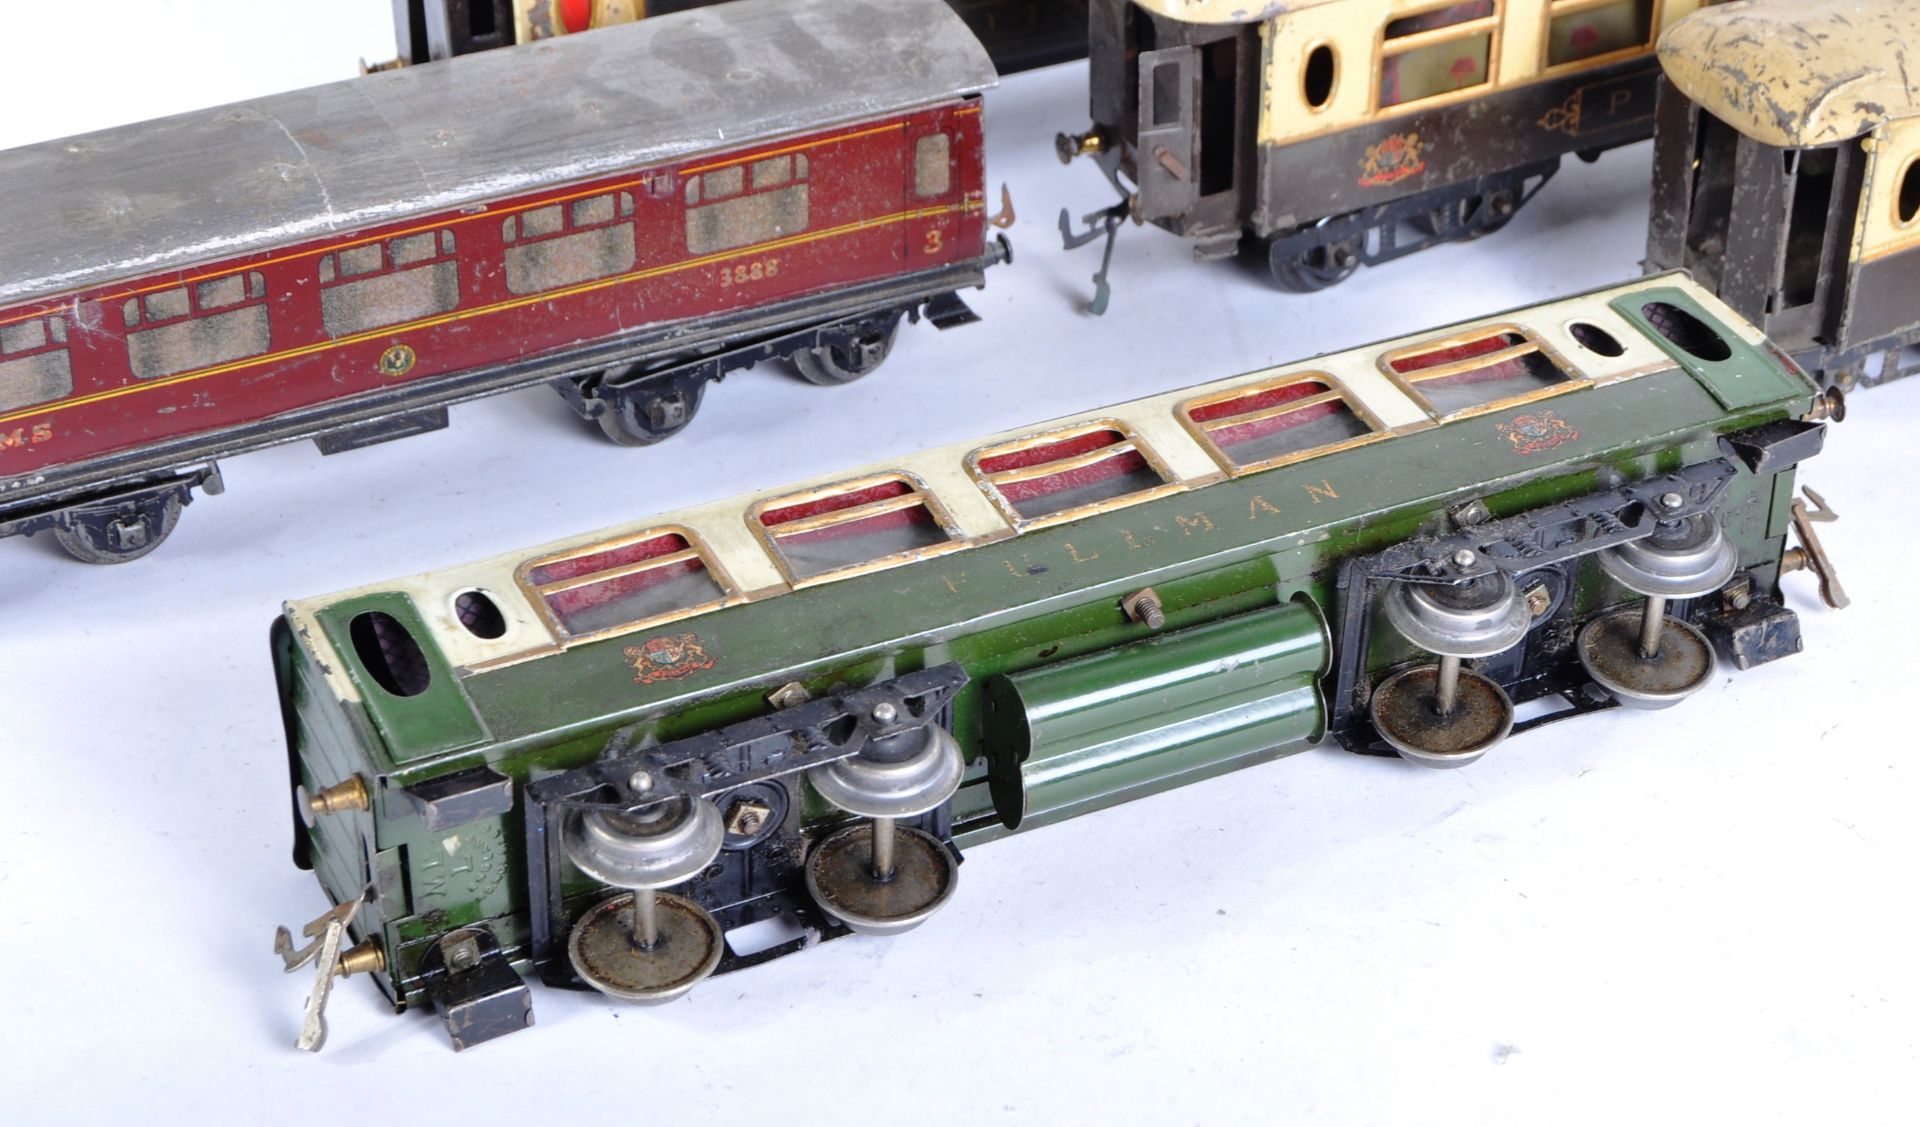 COLLECTION OF VINTAGE HORNBY O GAUGE TINPLATE TRAINSET CARRIAGES - Image 5 of 7